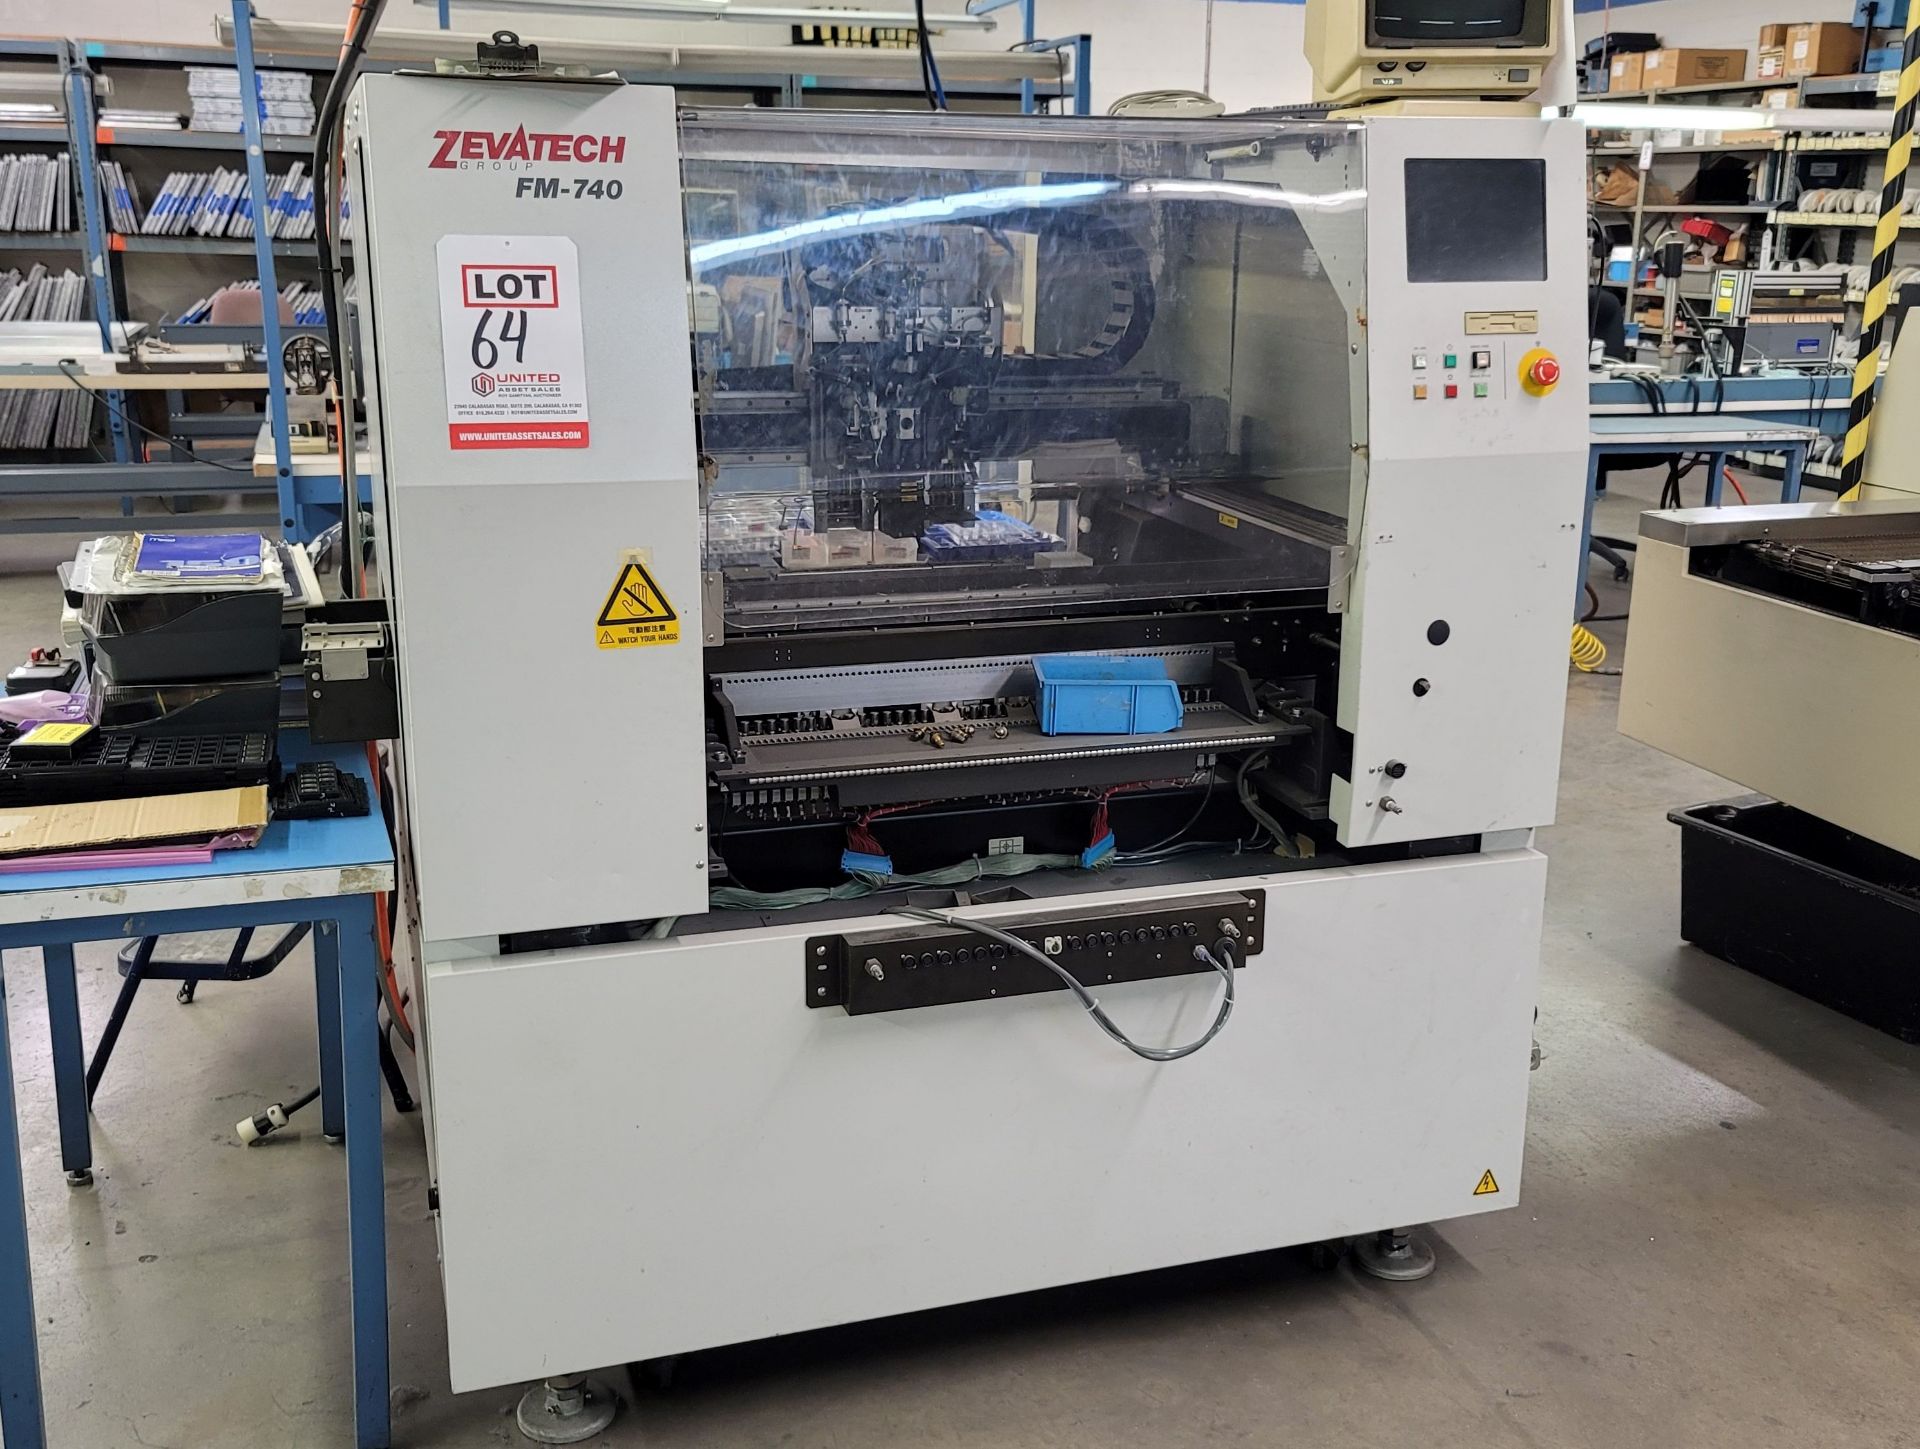 ZEVATECH FM-740 PICK & PLACE MACHINE, NO DATA TAG, FOR PARTS ONLY, THIS IS A NON-FUNCTIONING